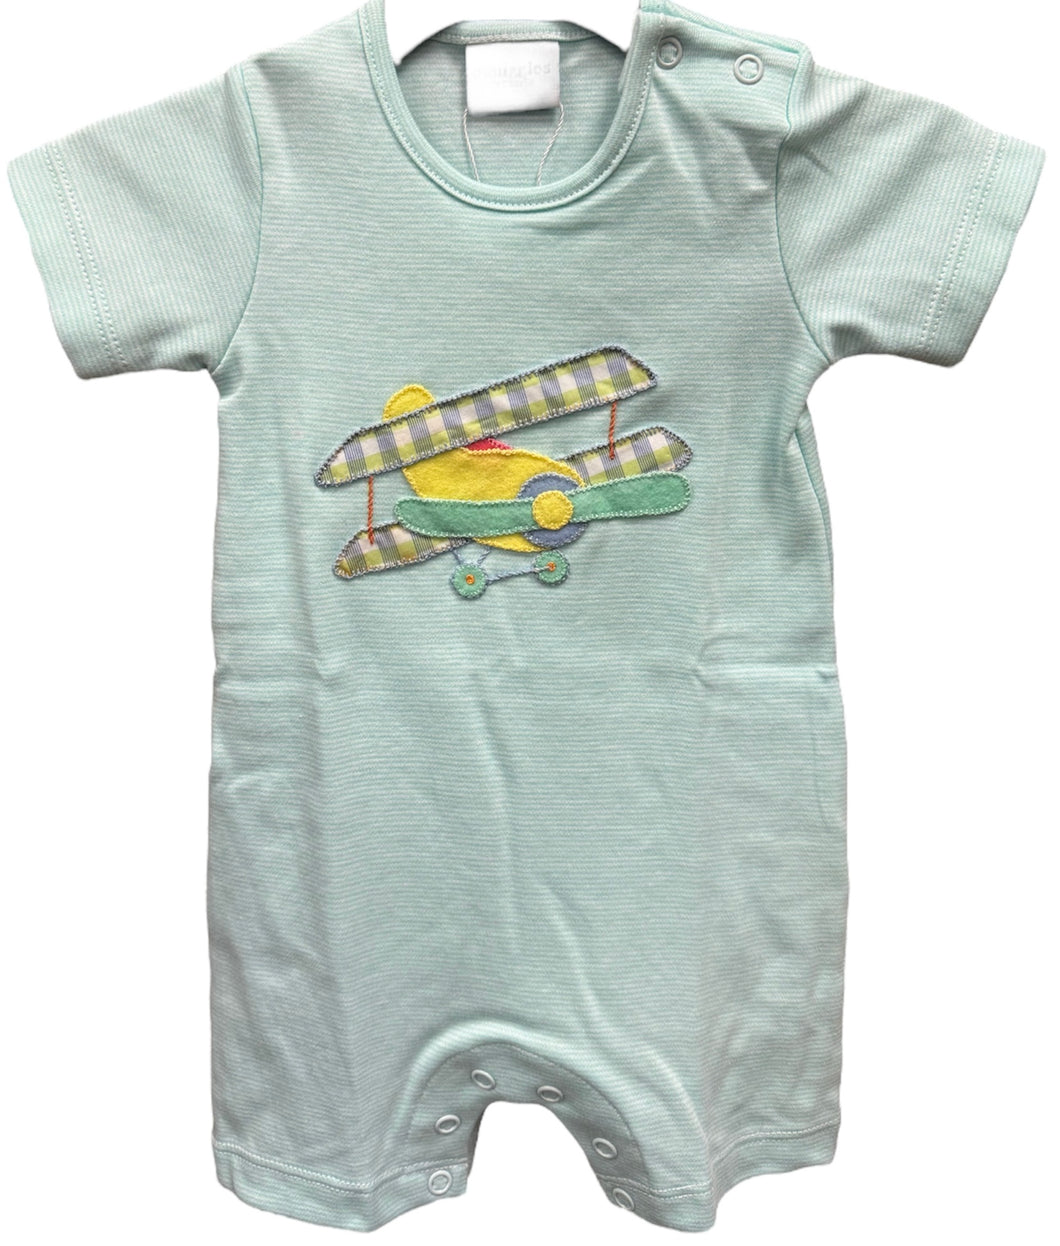 Take Off Plane Romper by Squiggles